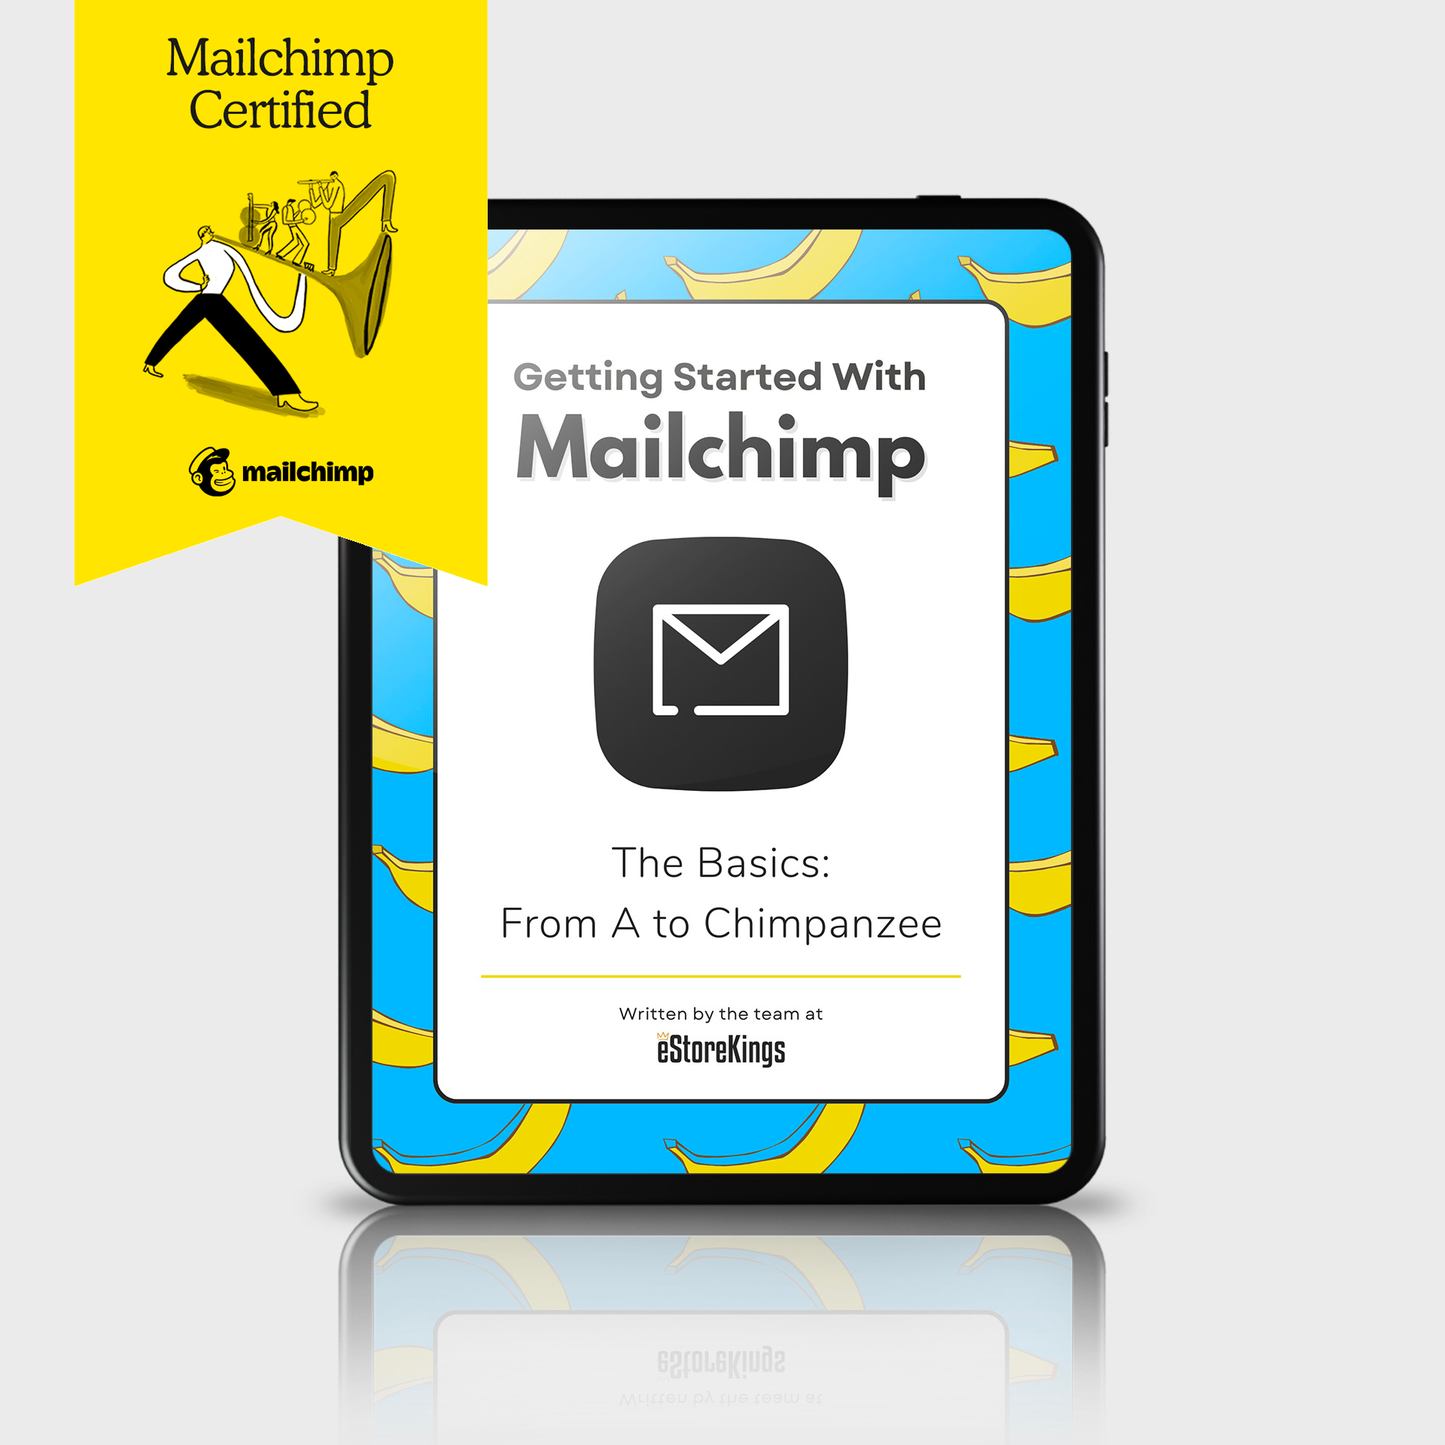 Getting Started with Mailchimp eBook